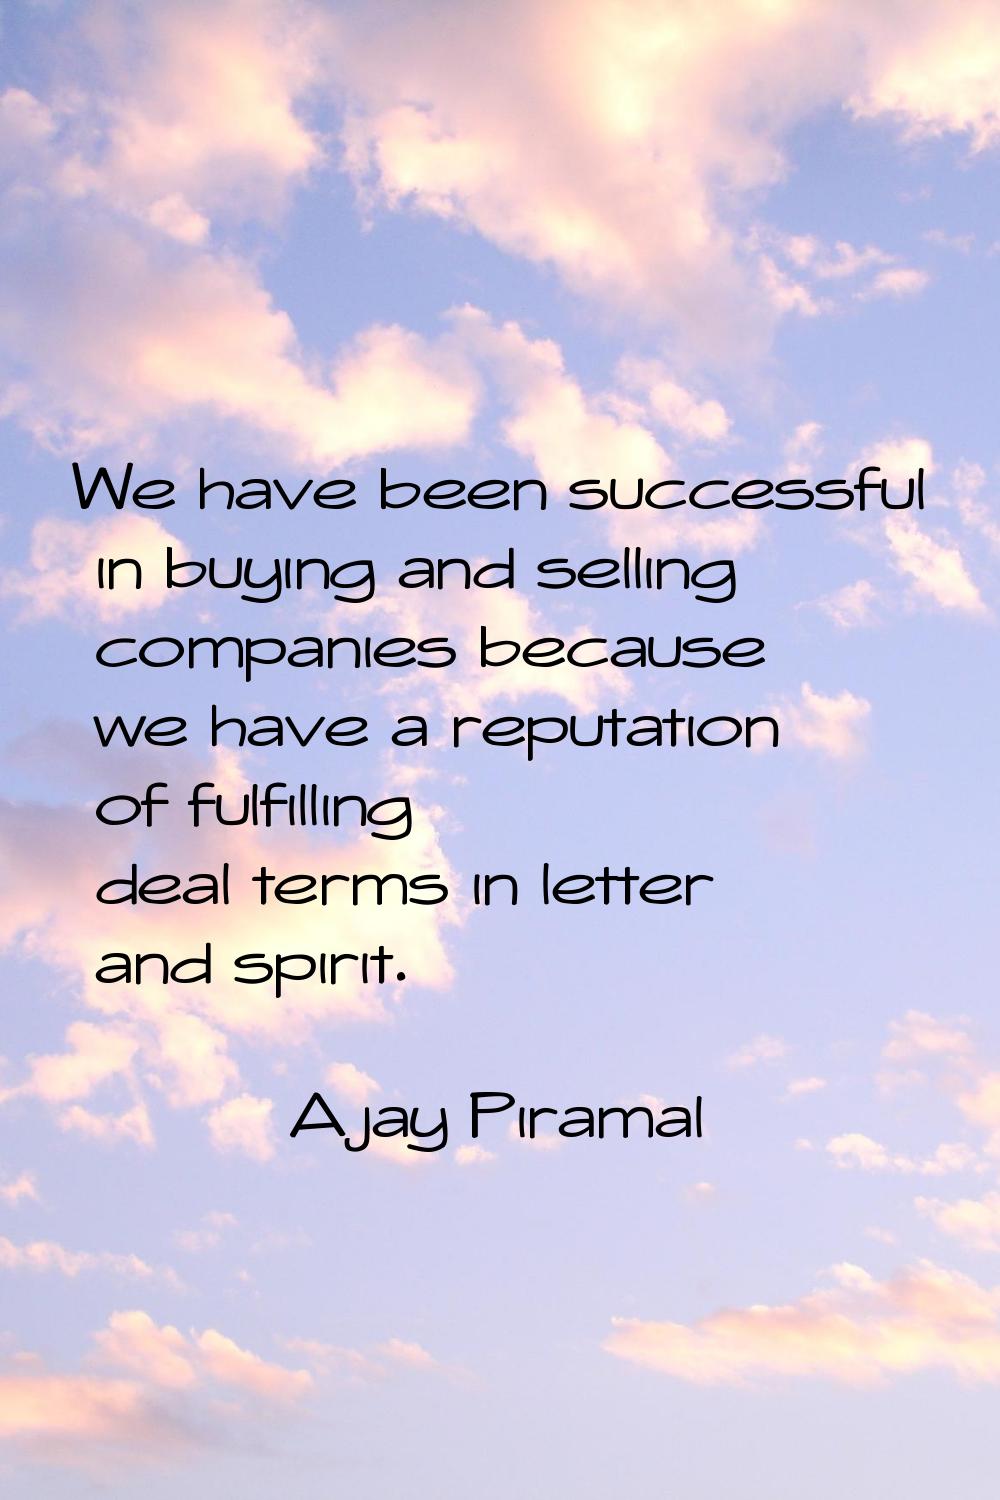 We have been successful in buying and selling companies because we have a reputation of fulfilling 